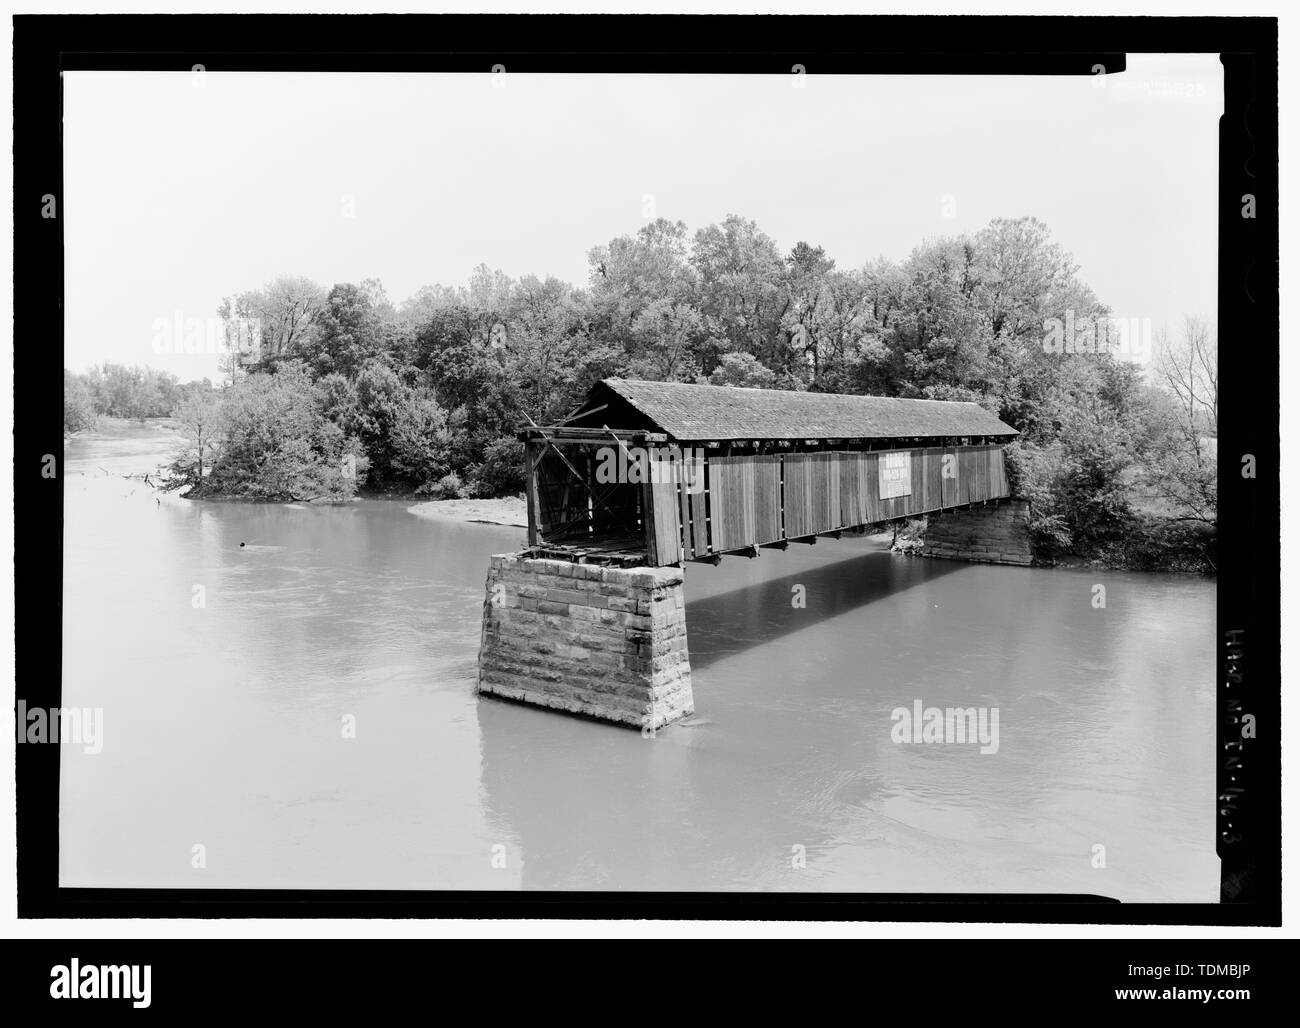 PERSPECTIVE VIEW. - Bells Ford Bridge, Spanning East Fork White River at State Route 258, Seymour, Jackson County, IN; Pattison, Robert; McNairy, Claflen and Company; Post, Simeon S; Post, Andrew; Hull, W L; Blish, John H; Bell, Isaac; Claflin, Henry; McNairy, Albert; Seymour Citizen's Association; Seymour Bridge Company; J.A. Barker Engineering; Union Pacific Railroad; Cleveland Bridge and Car Works; Atlantic Bridge Works; L.B. Bloomer and Company; Watson Manufacturing Company; Detroit Bridge Works; J.H. Cofrode; Christianson, Justine, transmitter; Marston, Christopher, project manager; Feder Stock Photo